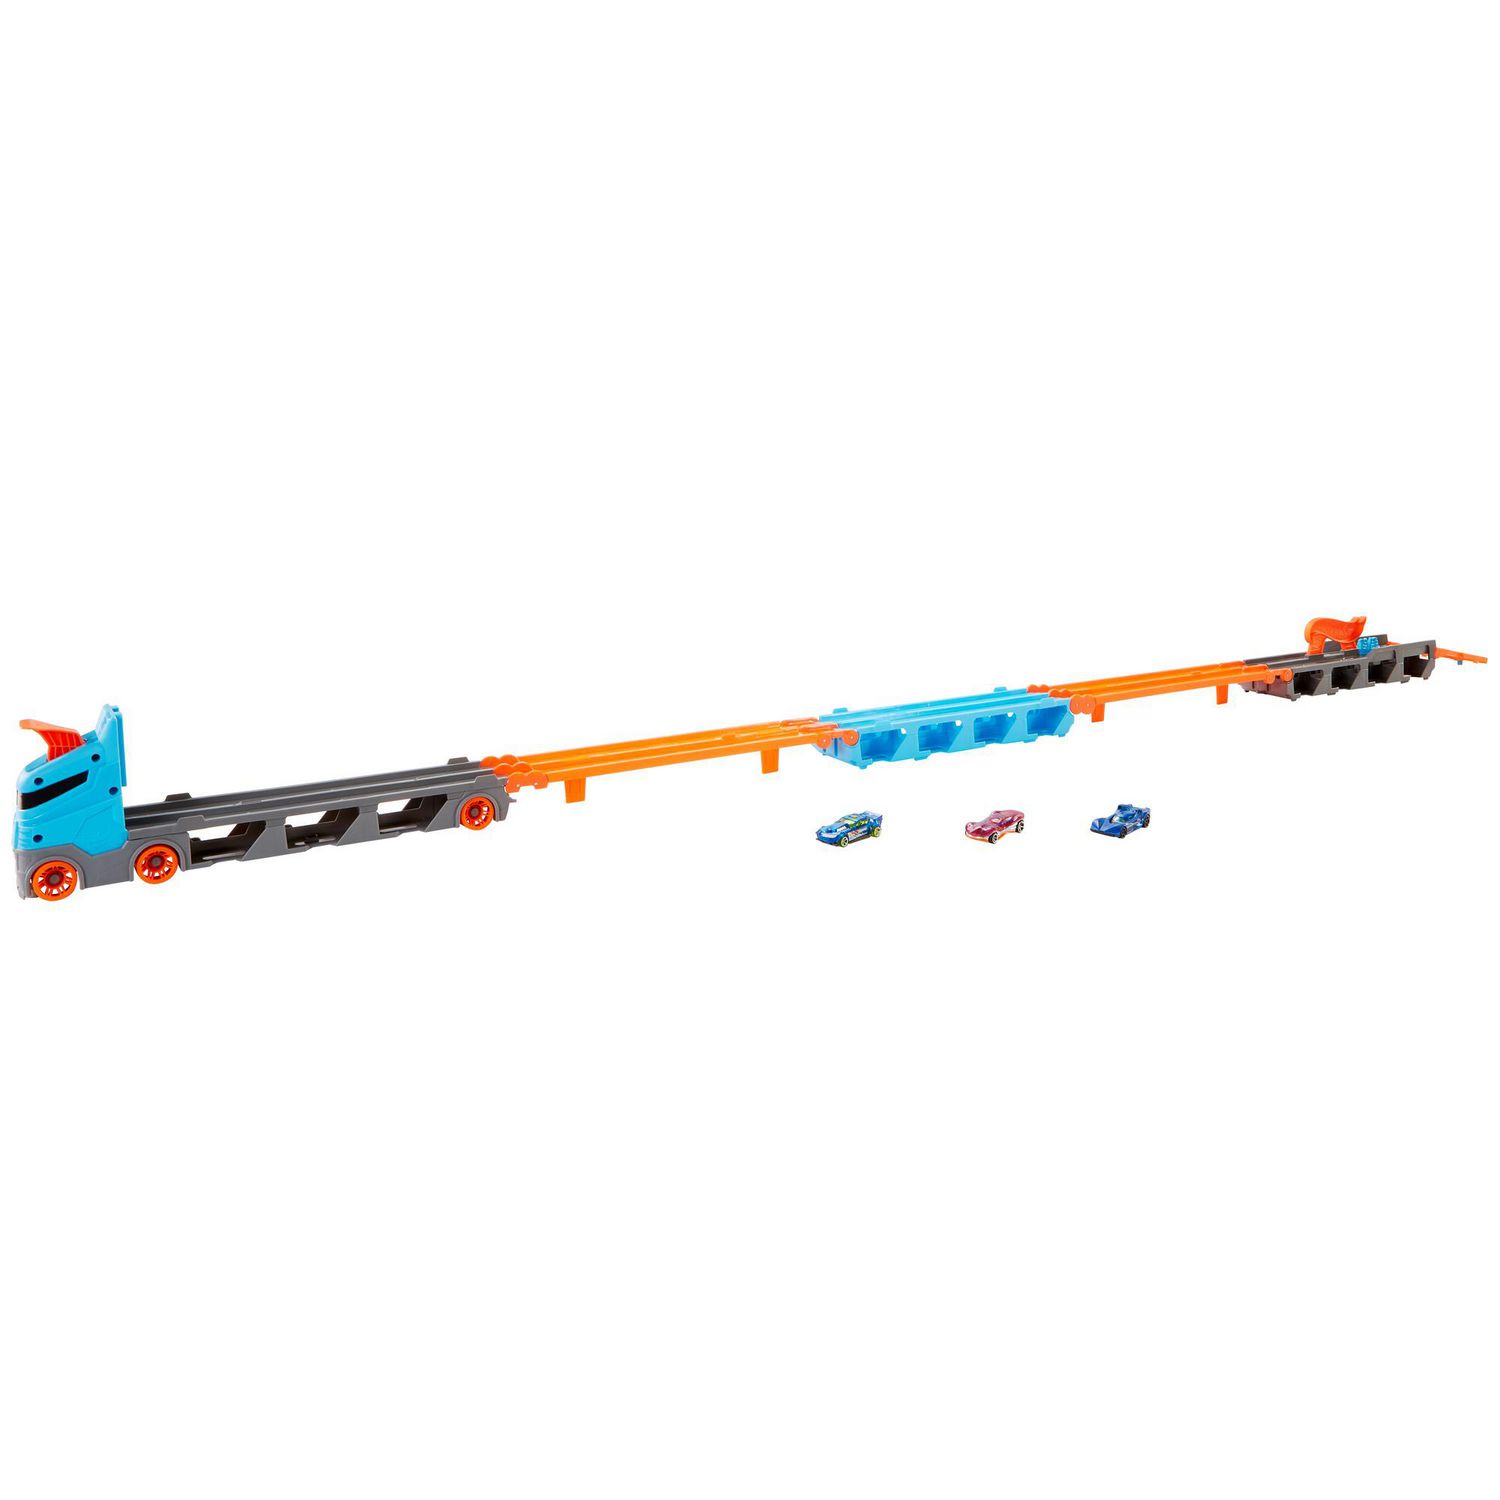 Hot Wheels Speedway Hauler Storage Carrier with 3 1:64 Scale Cars